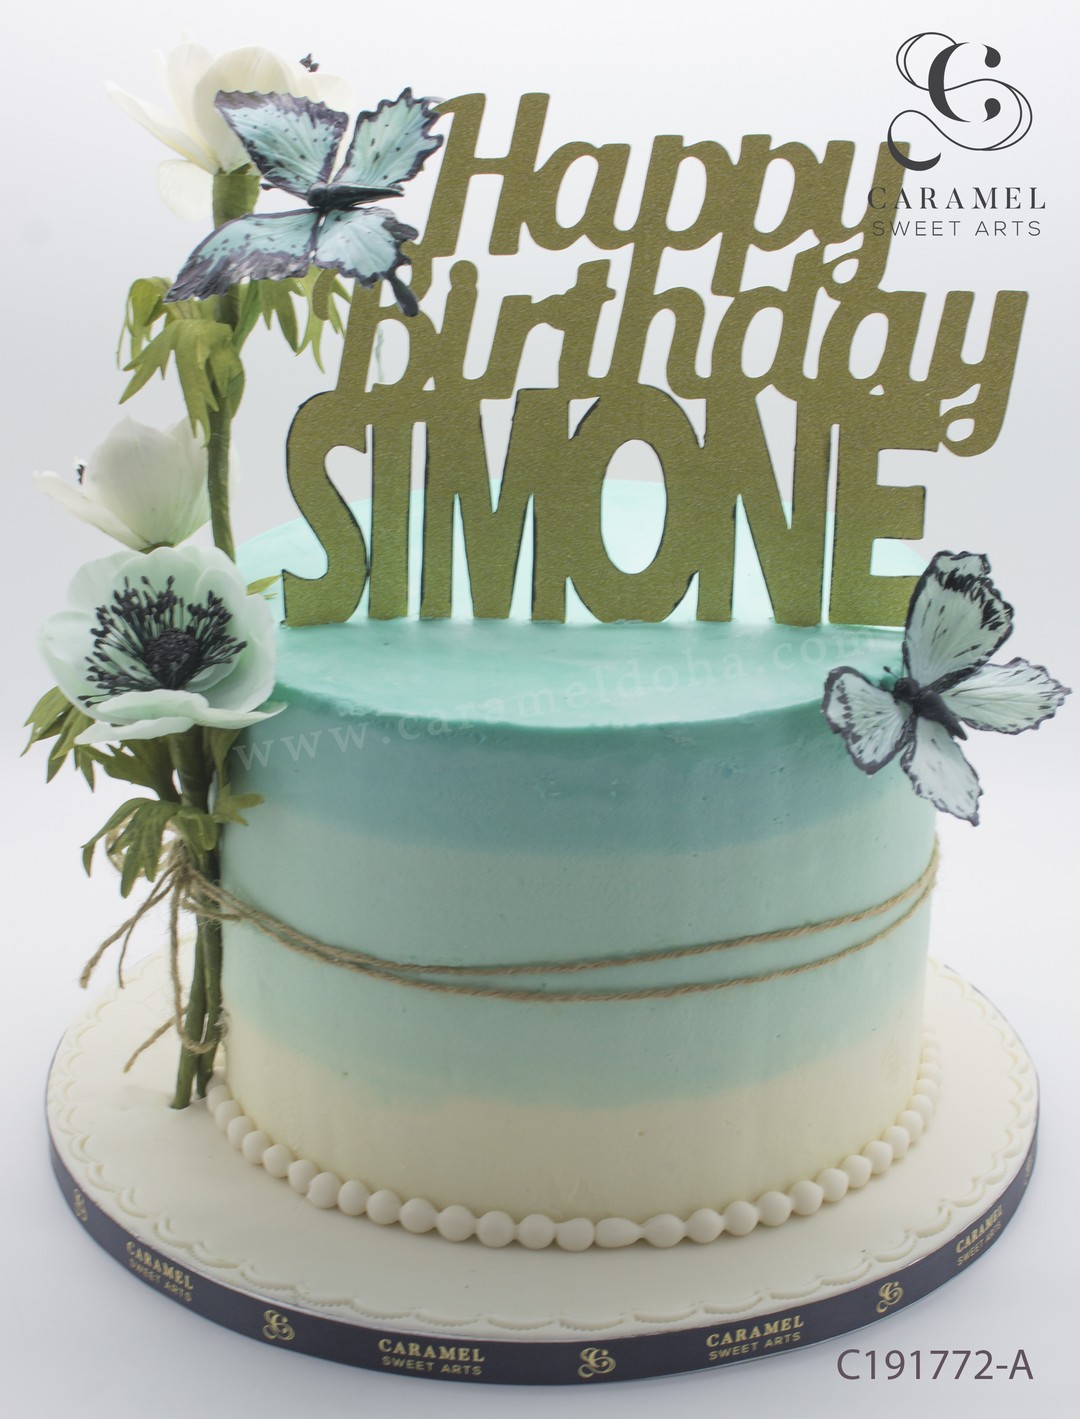 Simone Louise Cakes - Bouncy Castle and Soft Play Hire in Sevenoaks,  Dartford, Bexley, Orpington, Sidcup, Gravesend & Kent